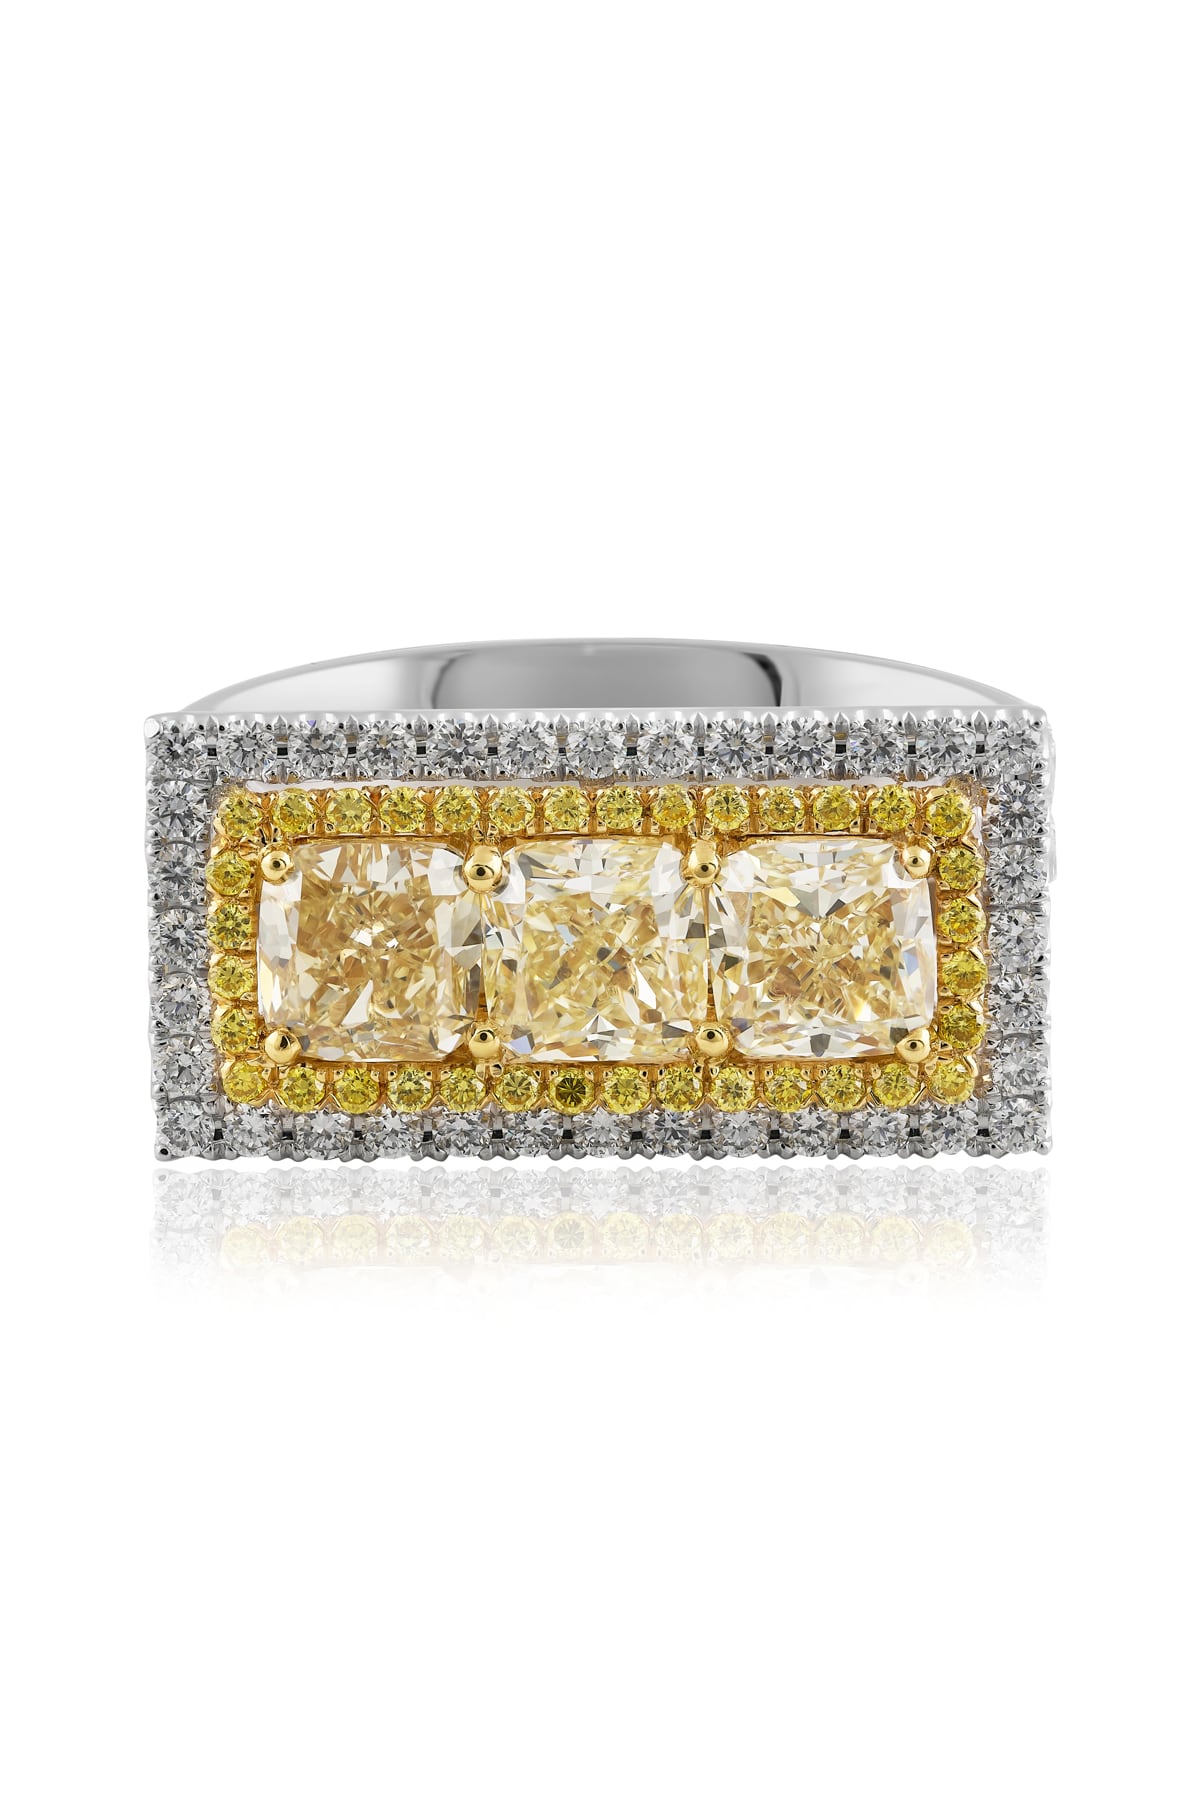 Cushion-Cut Fancy Yellow And White Diamond Ring from LeGassick Jewellery Gold Coast.